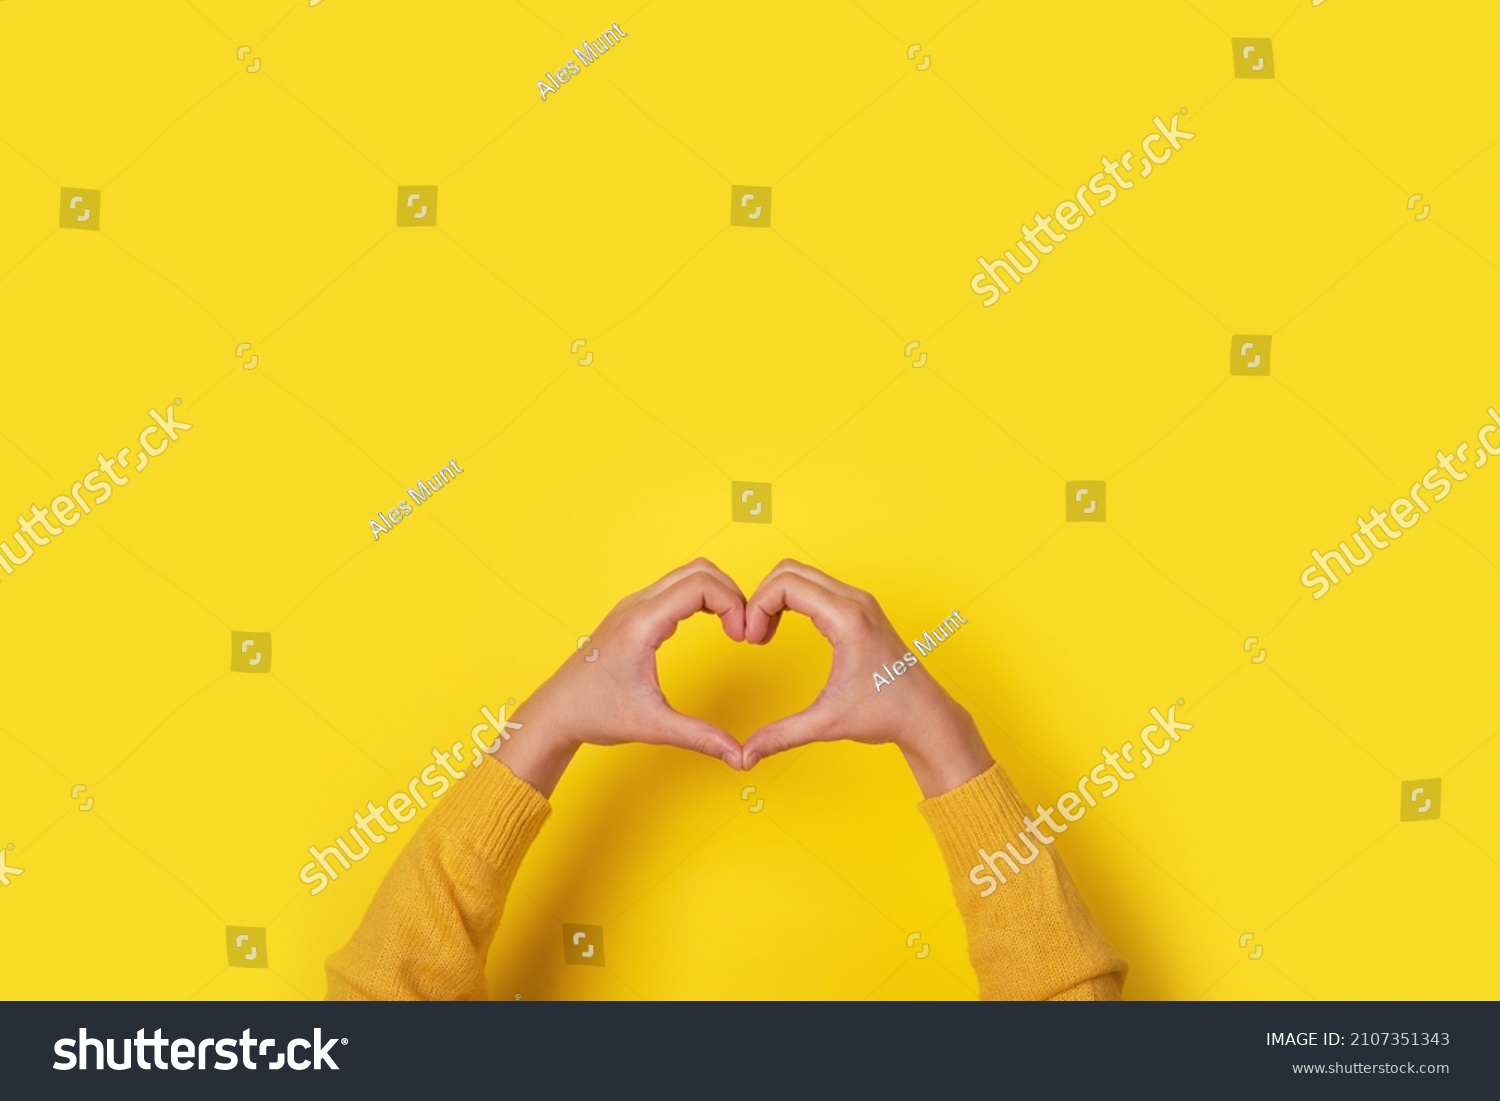 Hands making heart shape, love symbol over yellow background #2107351343